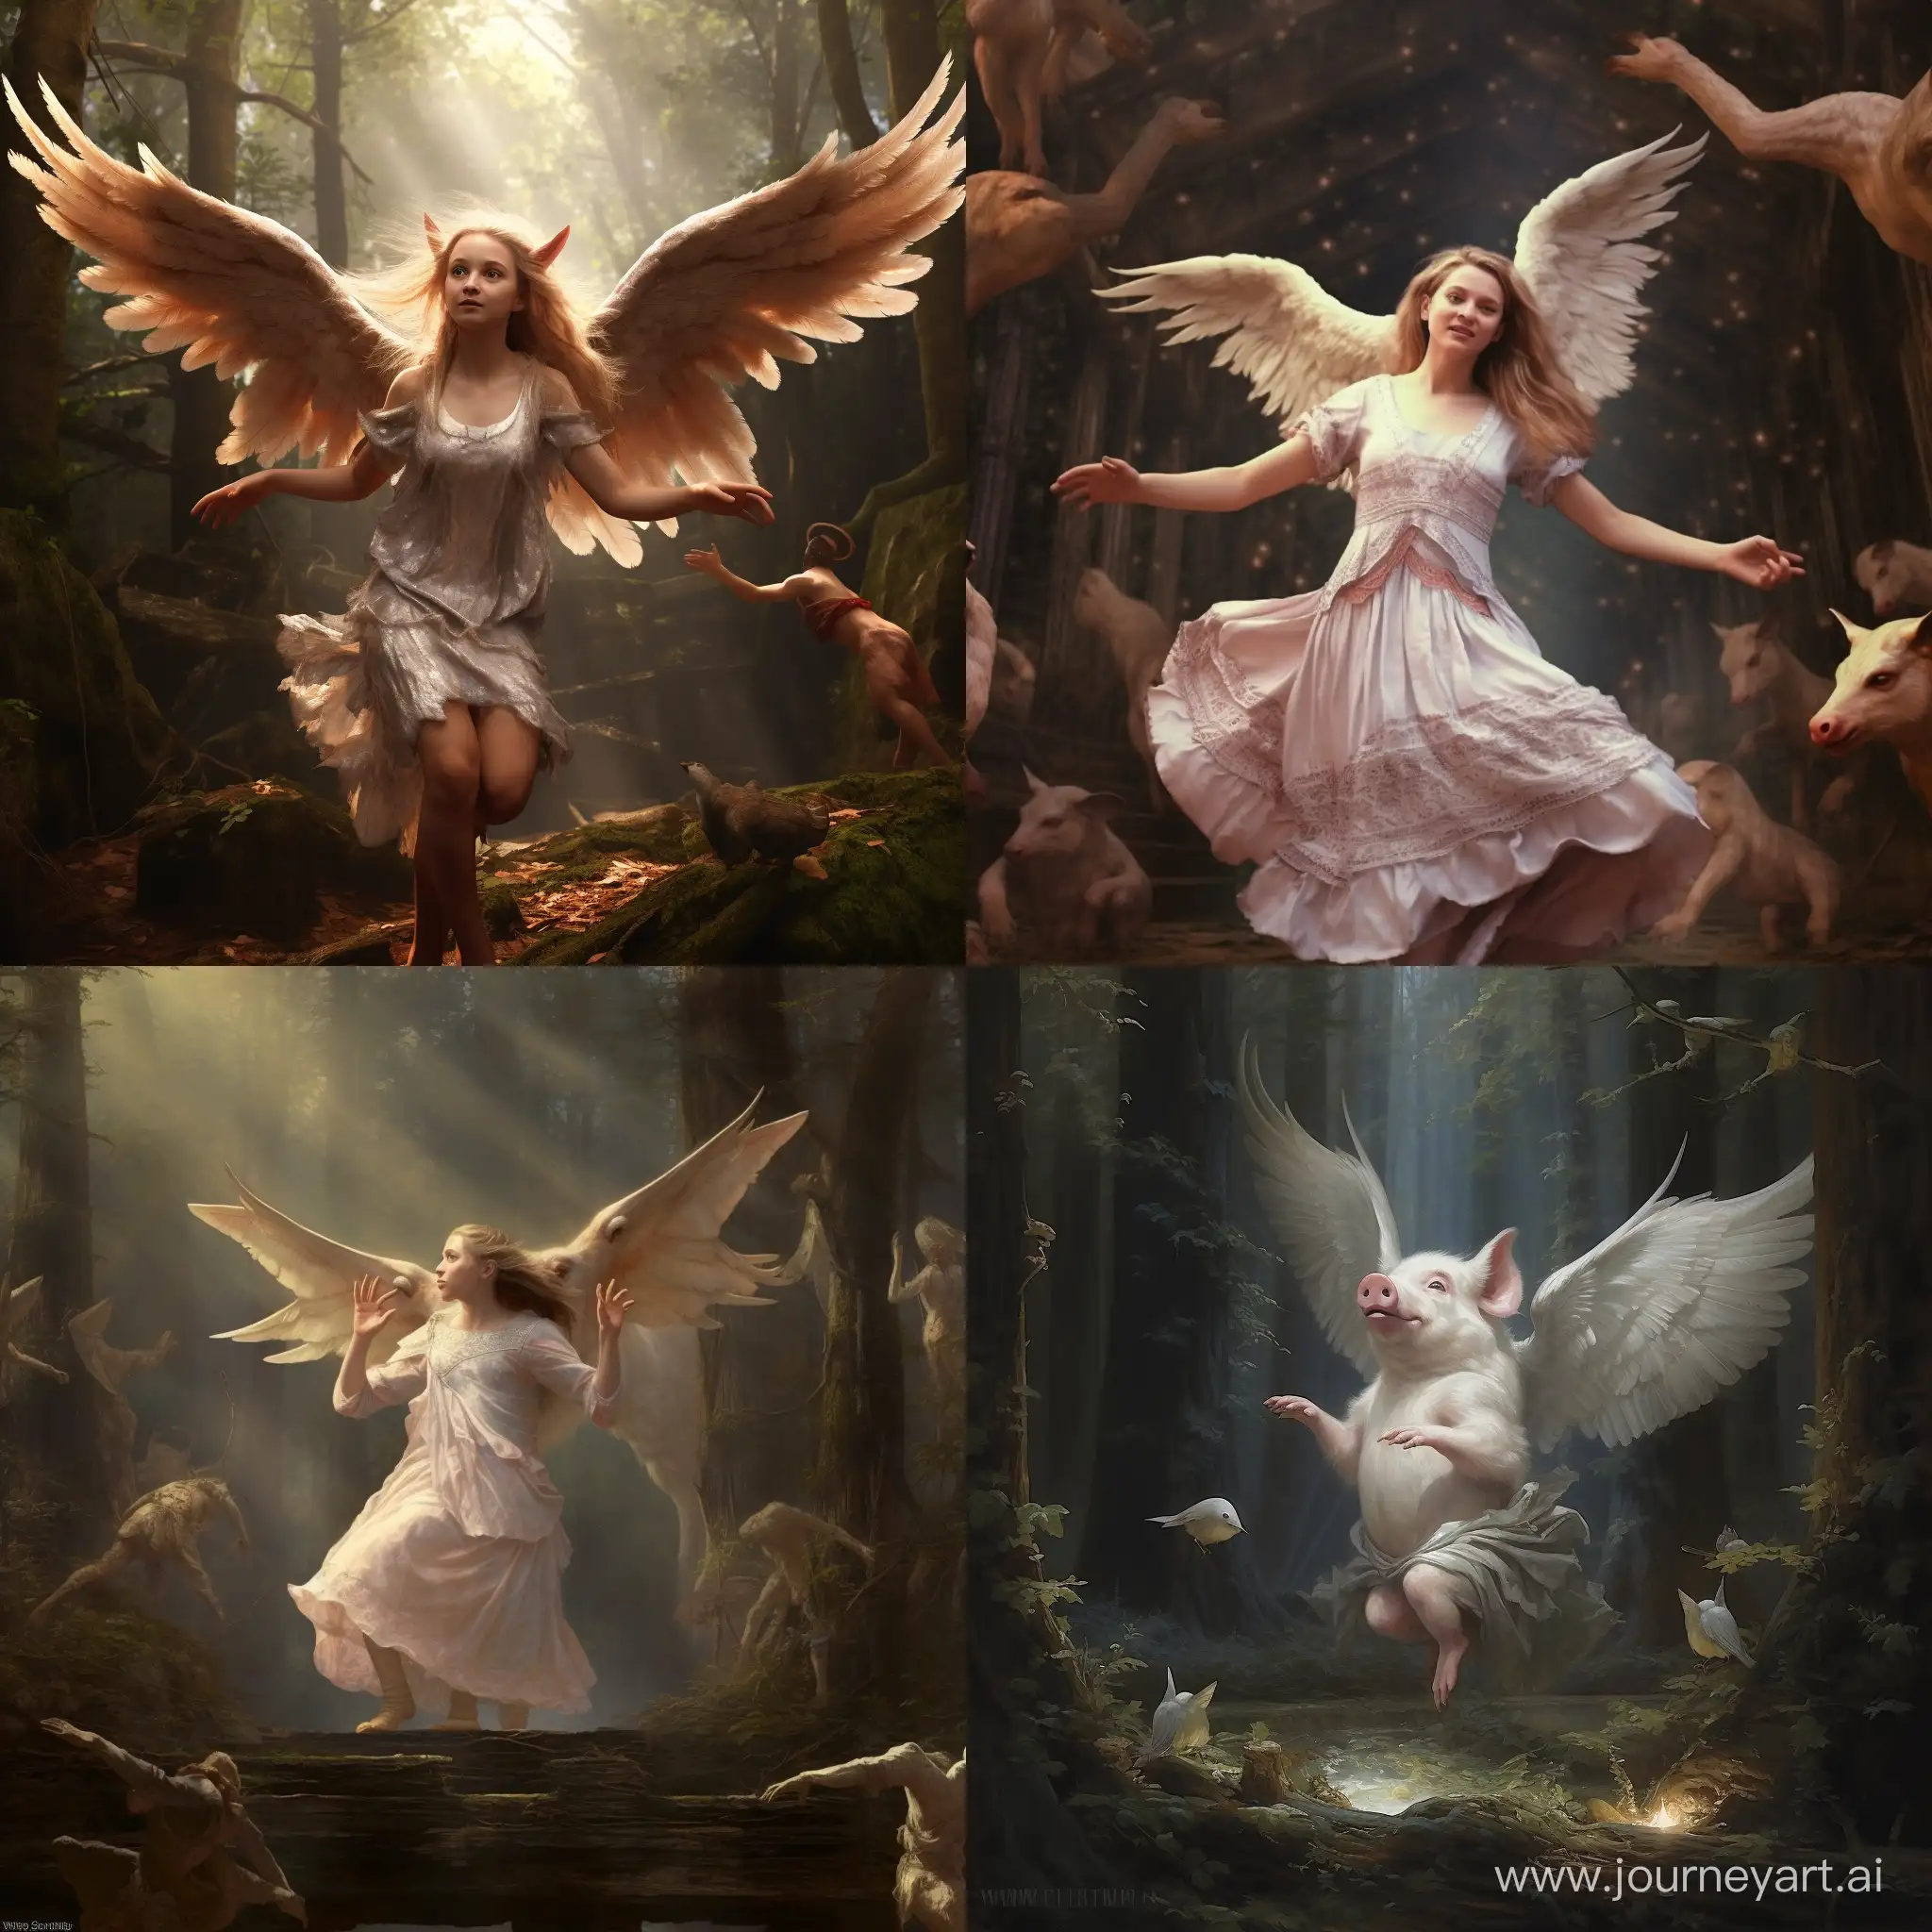 An Angel dances in the woods while pigs watch.